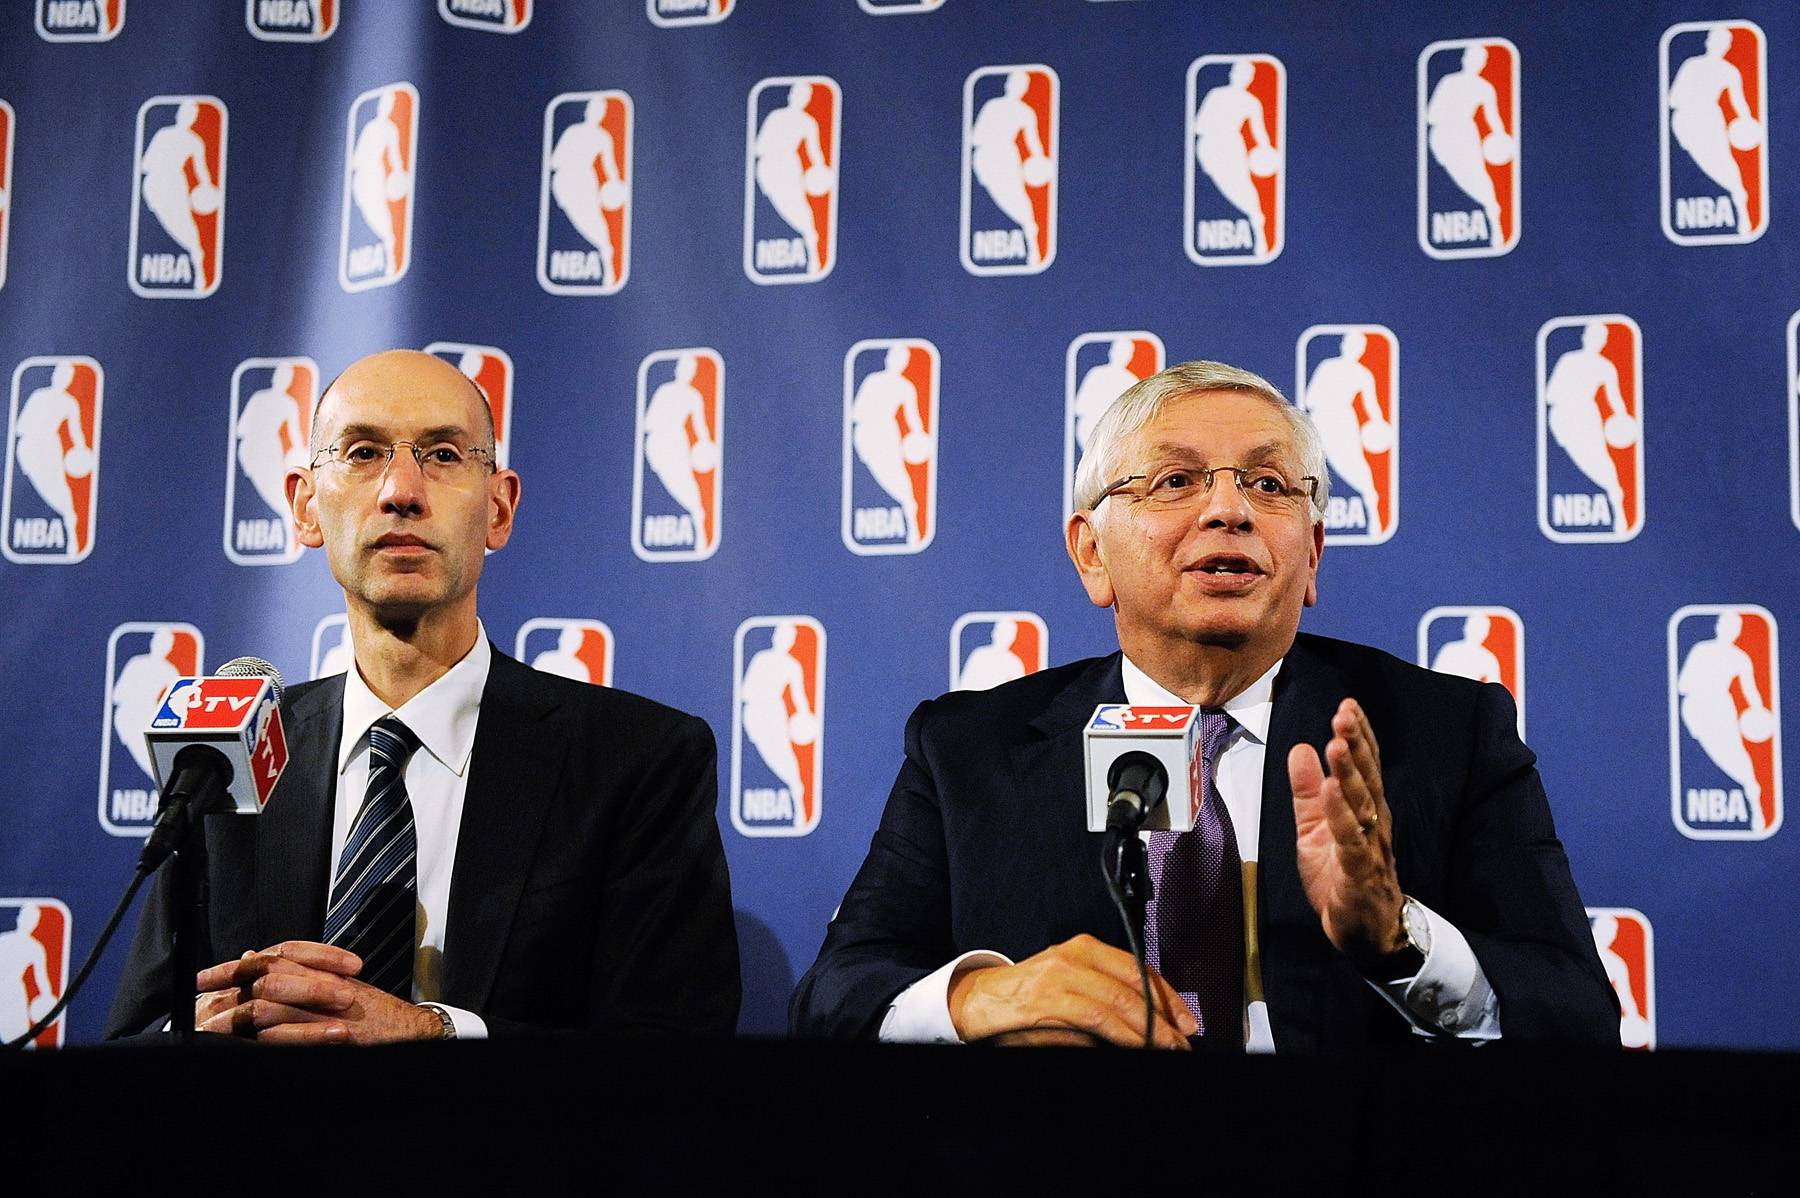 NBA Cancels First Two Weeks of Season - The National Basketball Association announced Monday, Oct. 10, that the first two weeks of the season have been canceled. Owners and players weren’t able to reach a deal during Monday’s seven-hour negotiating session.(Photo: Patrick McDermott/Getty Images)